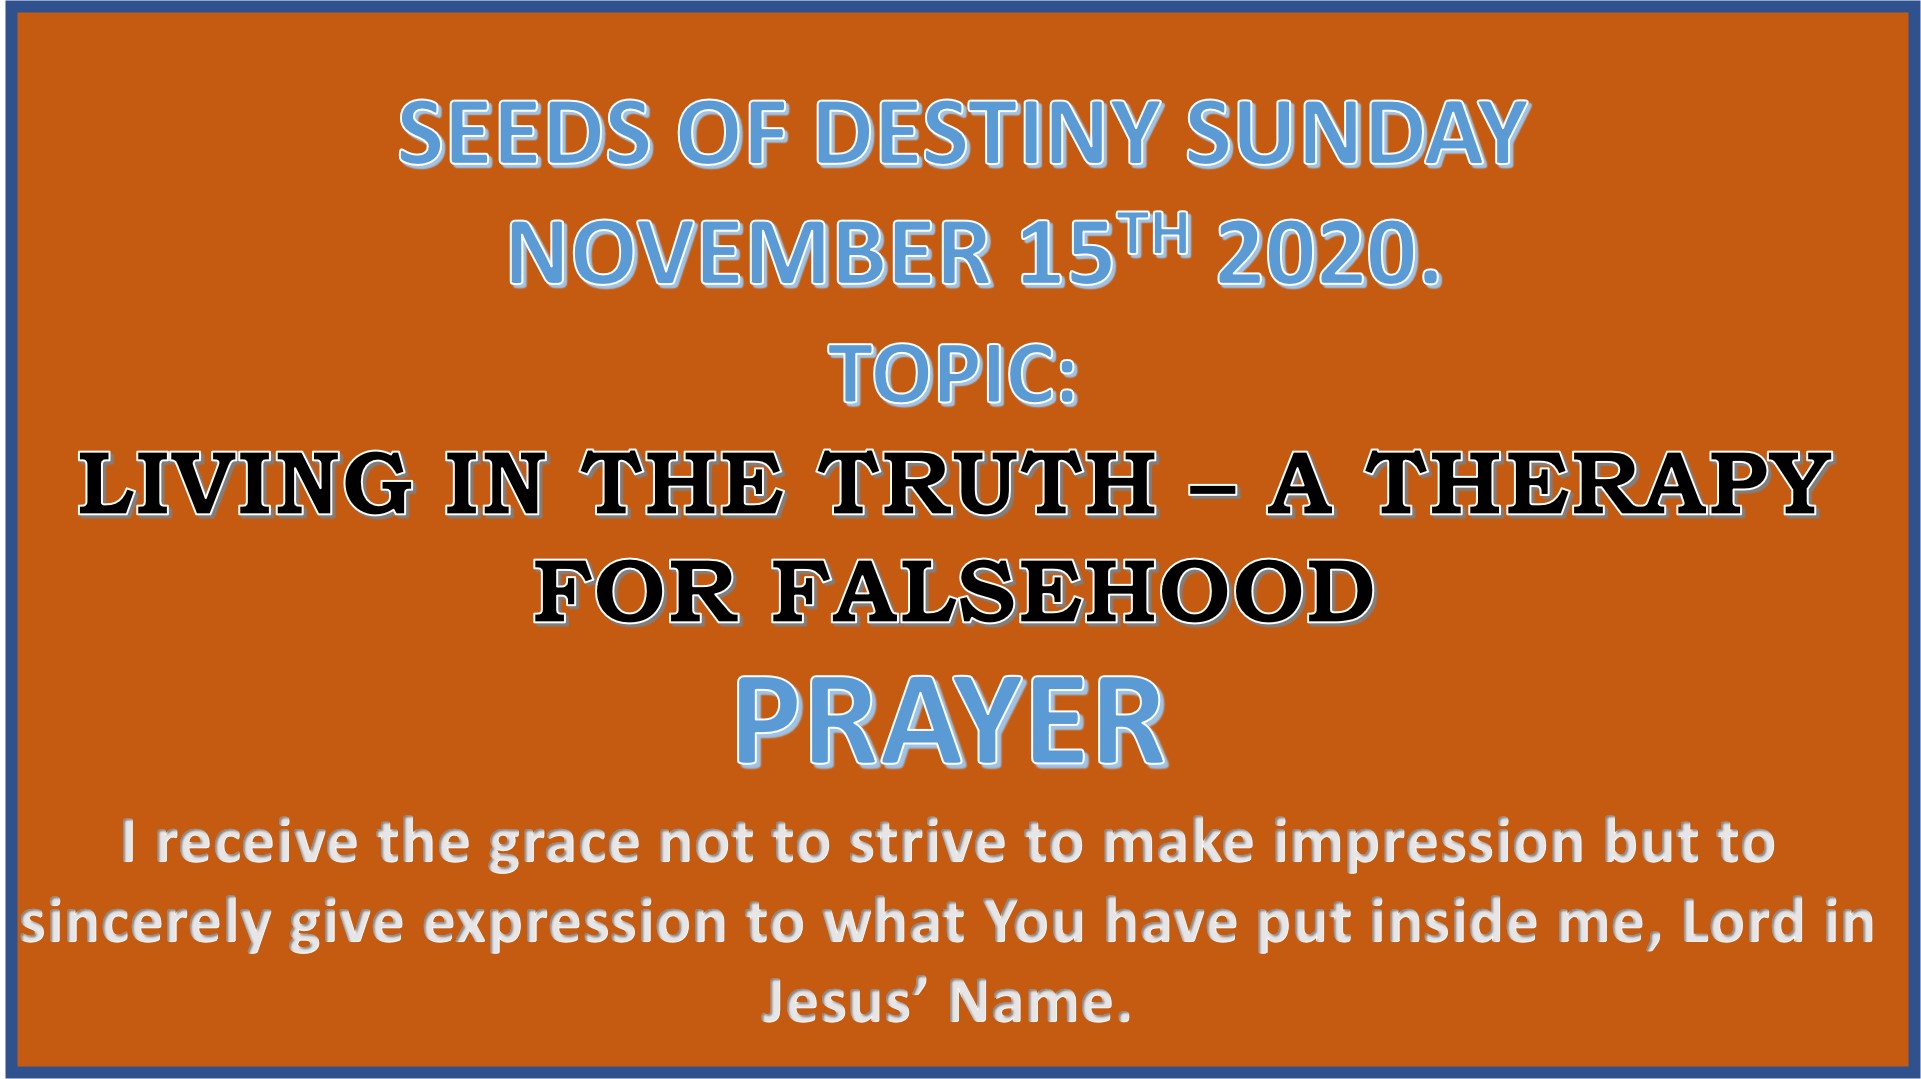 Seeds of Destiny Sunday 15th November 2020 by Dr Paul Enenche